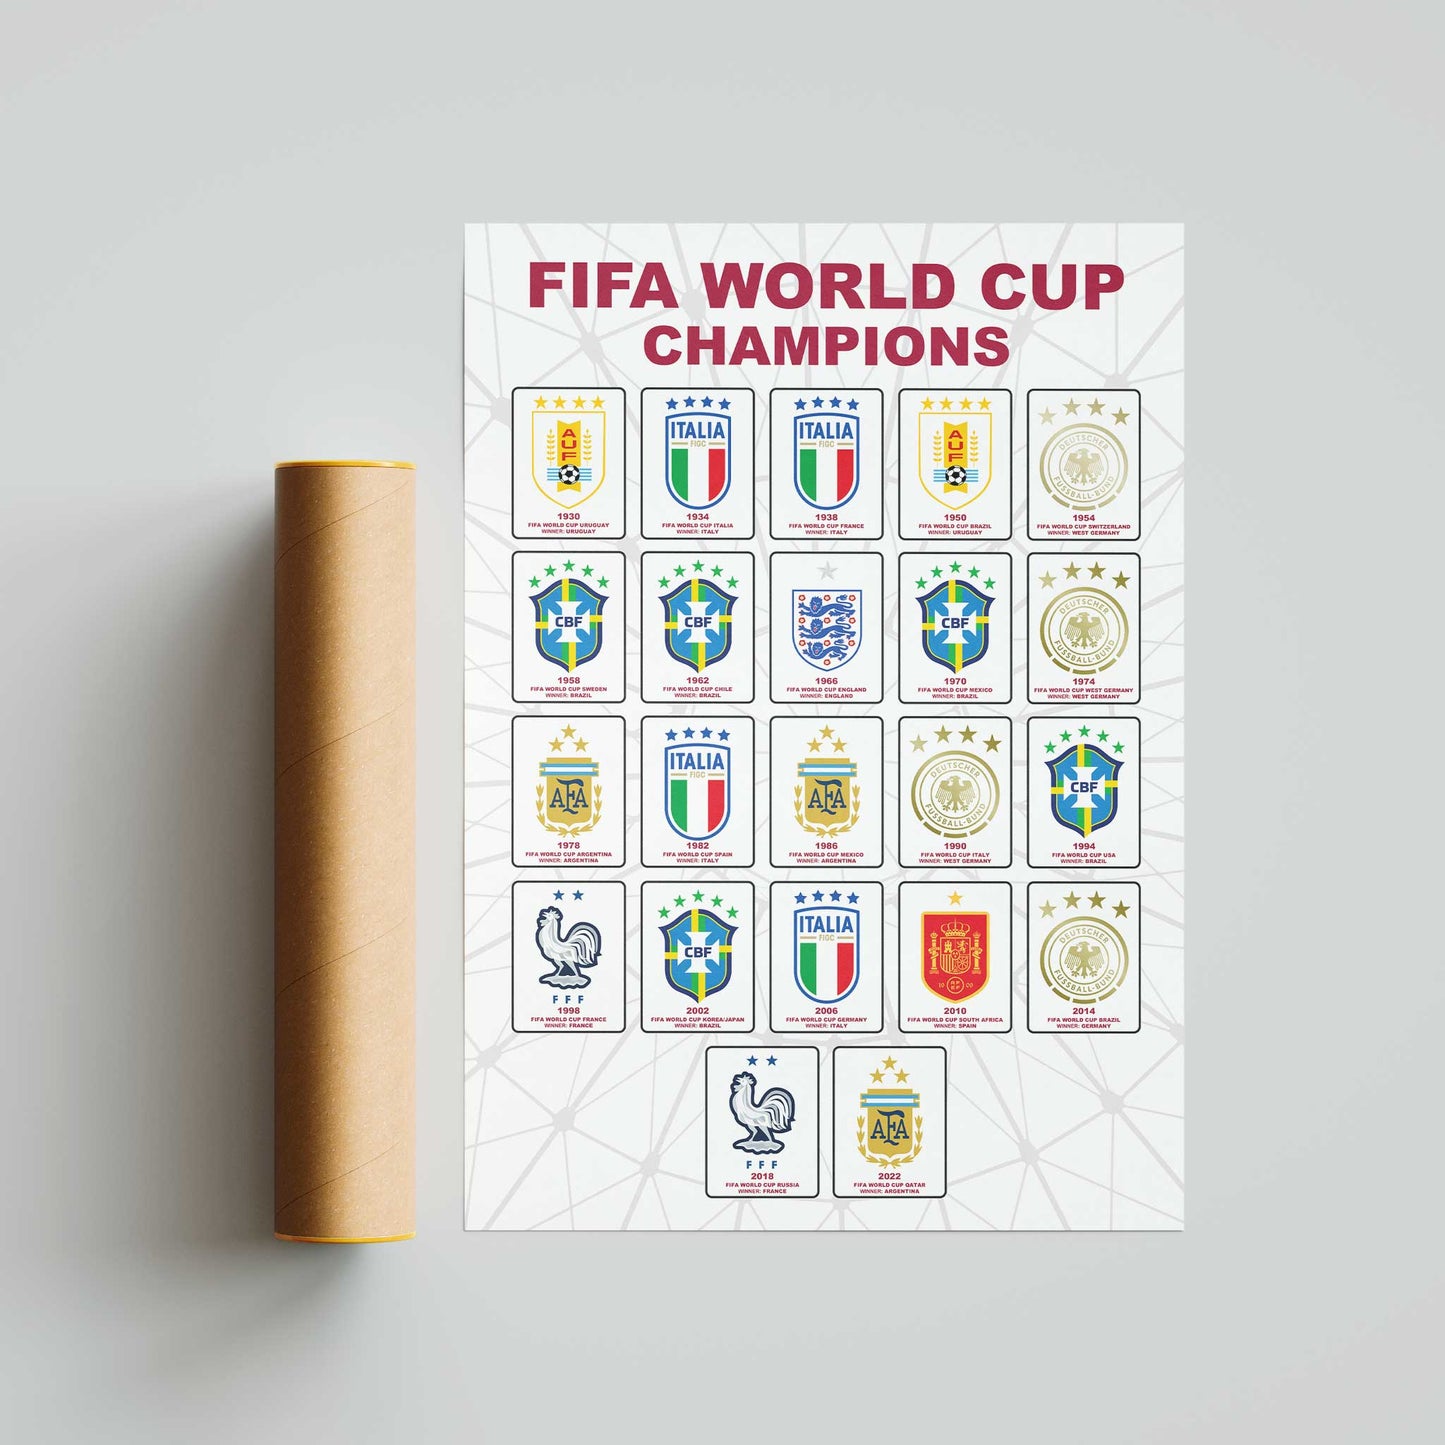 World Cup Champions Football Poster - All World Cup Winners From 1930 to 2026